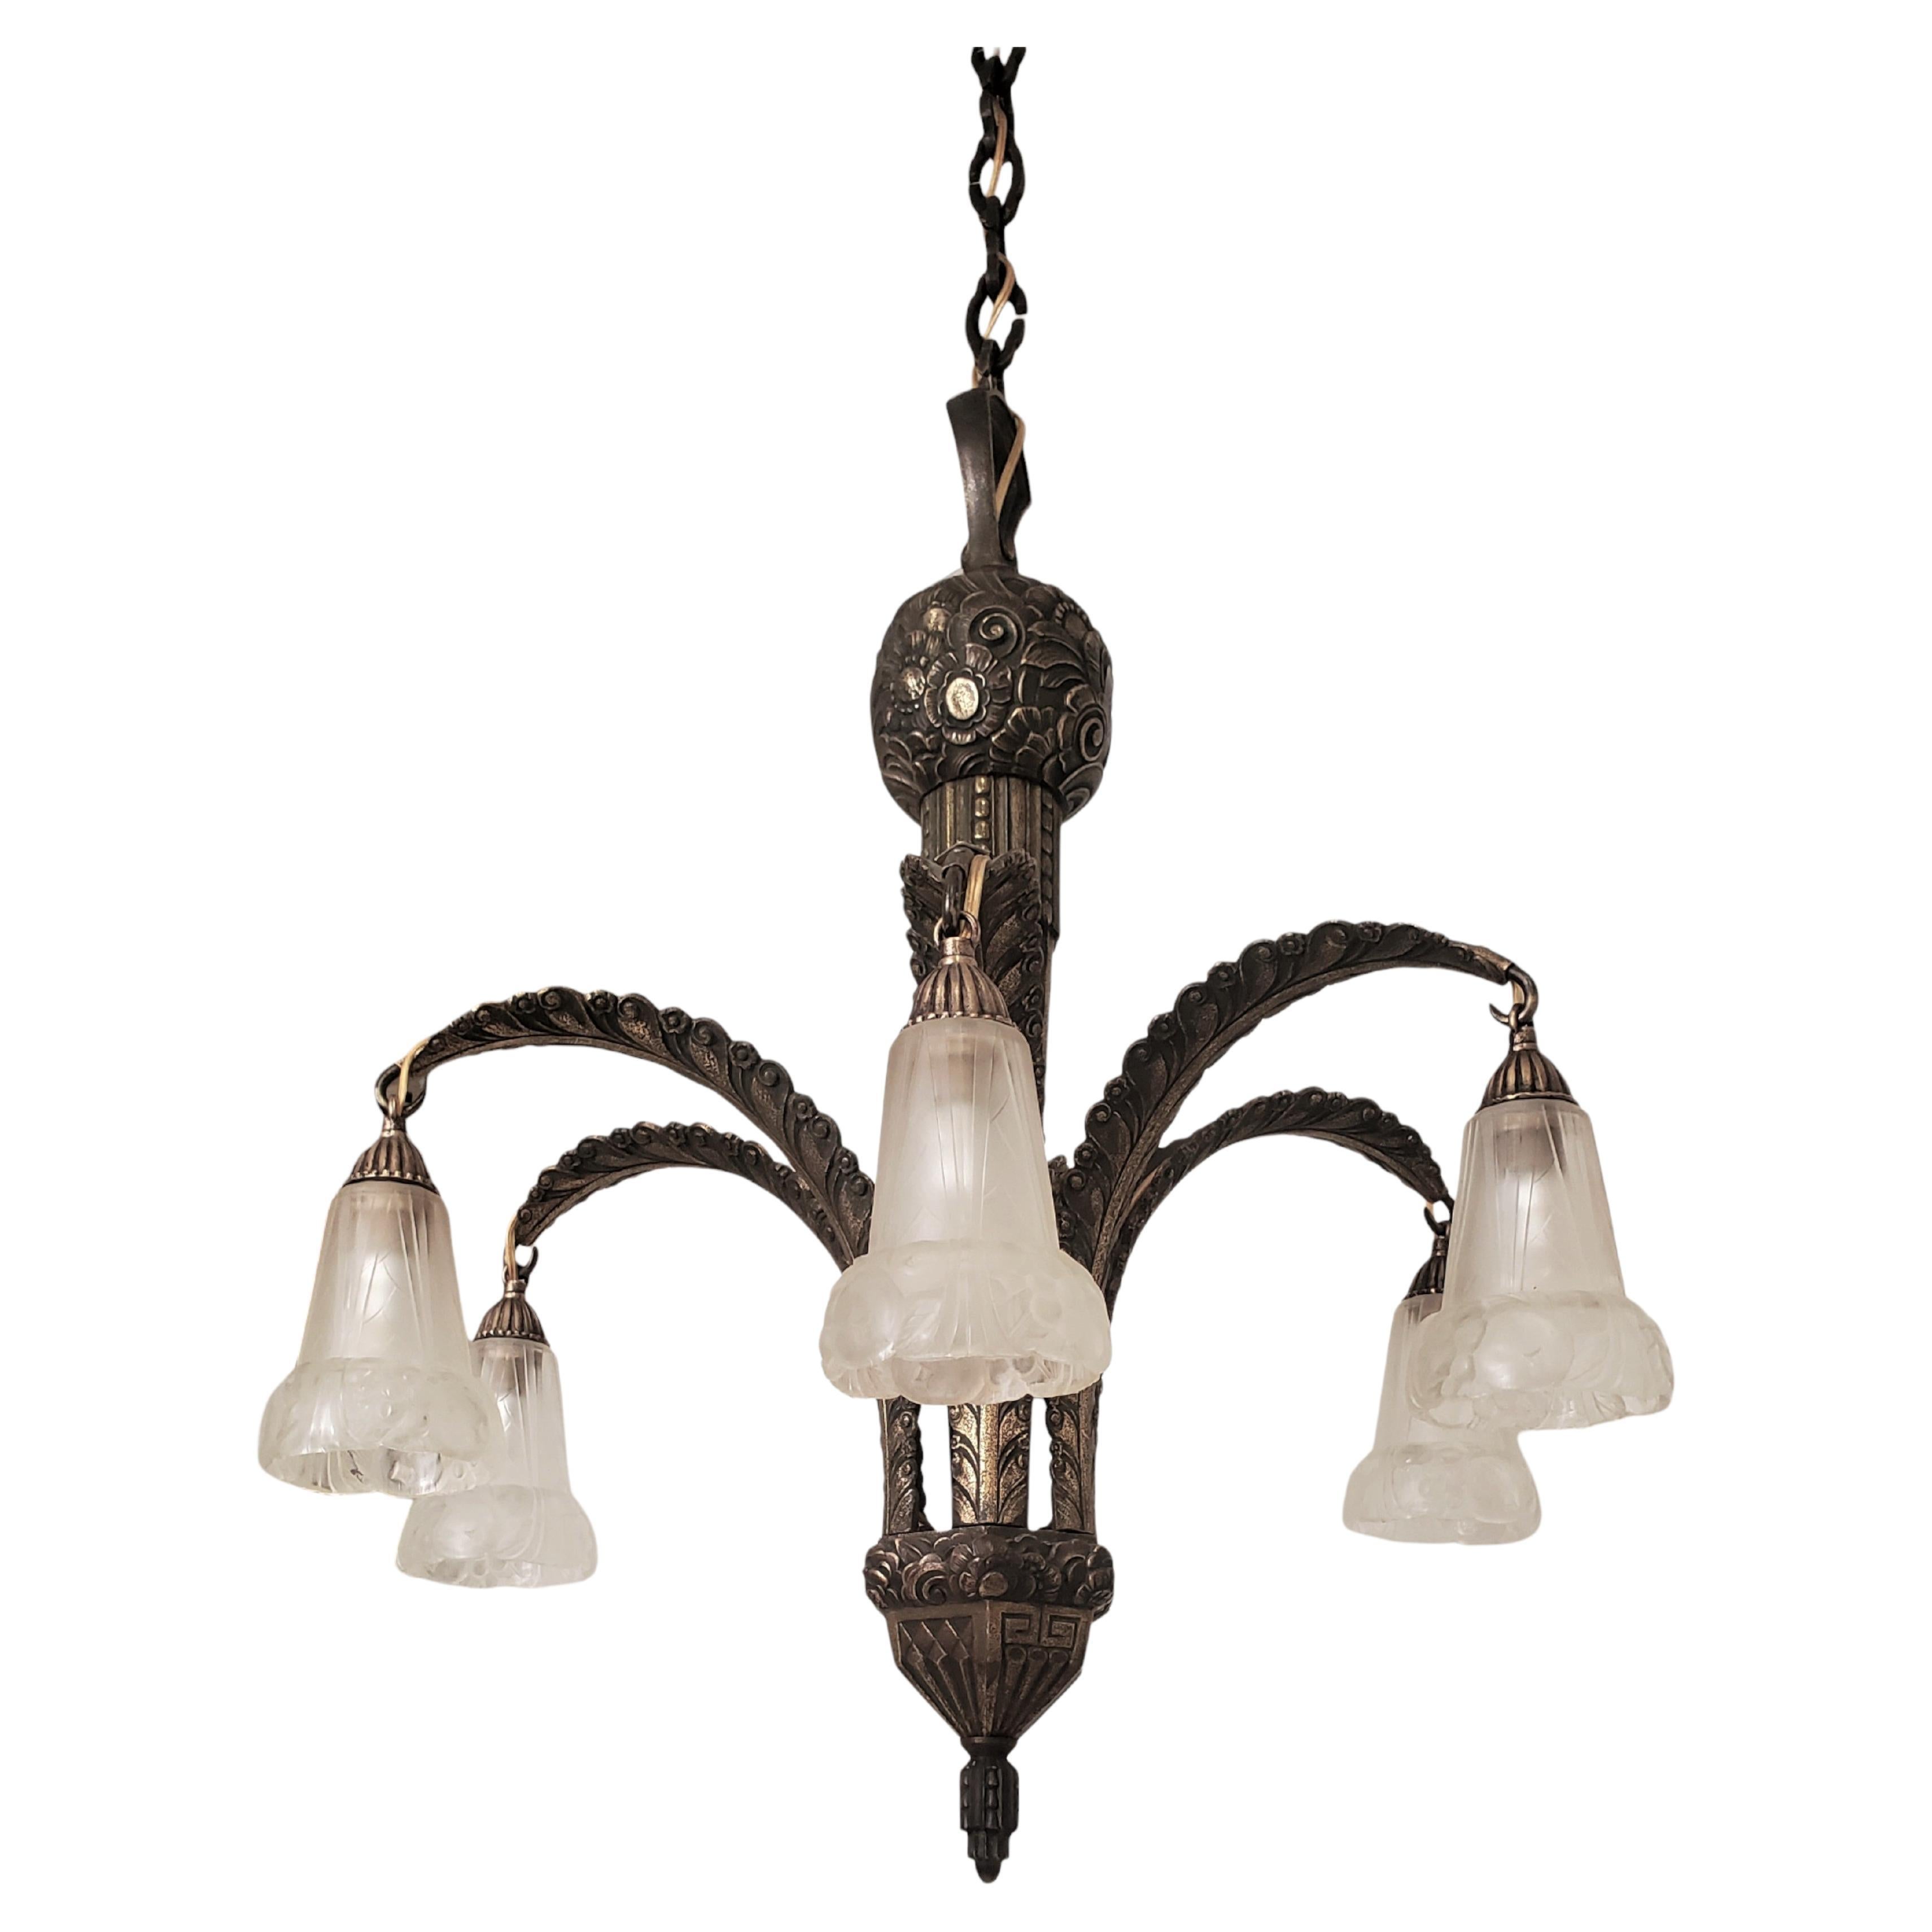  
This unique French Art Deco bronze palm chandelier by Paul Gilles features a captivating and warm gilt bronze finish, with six fluid arms in a stunning tropical arrangement. 
Each feather arm is adorned with exquisitely molded frosted art glass